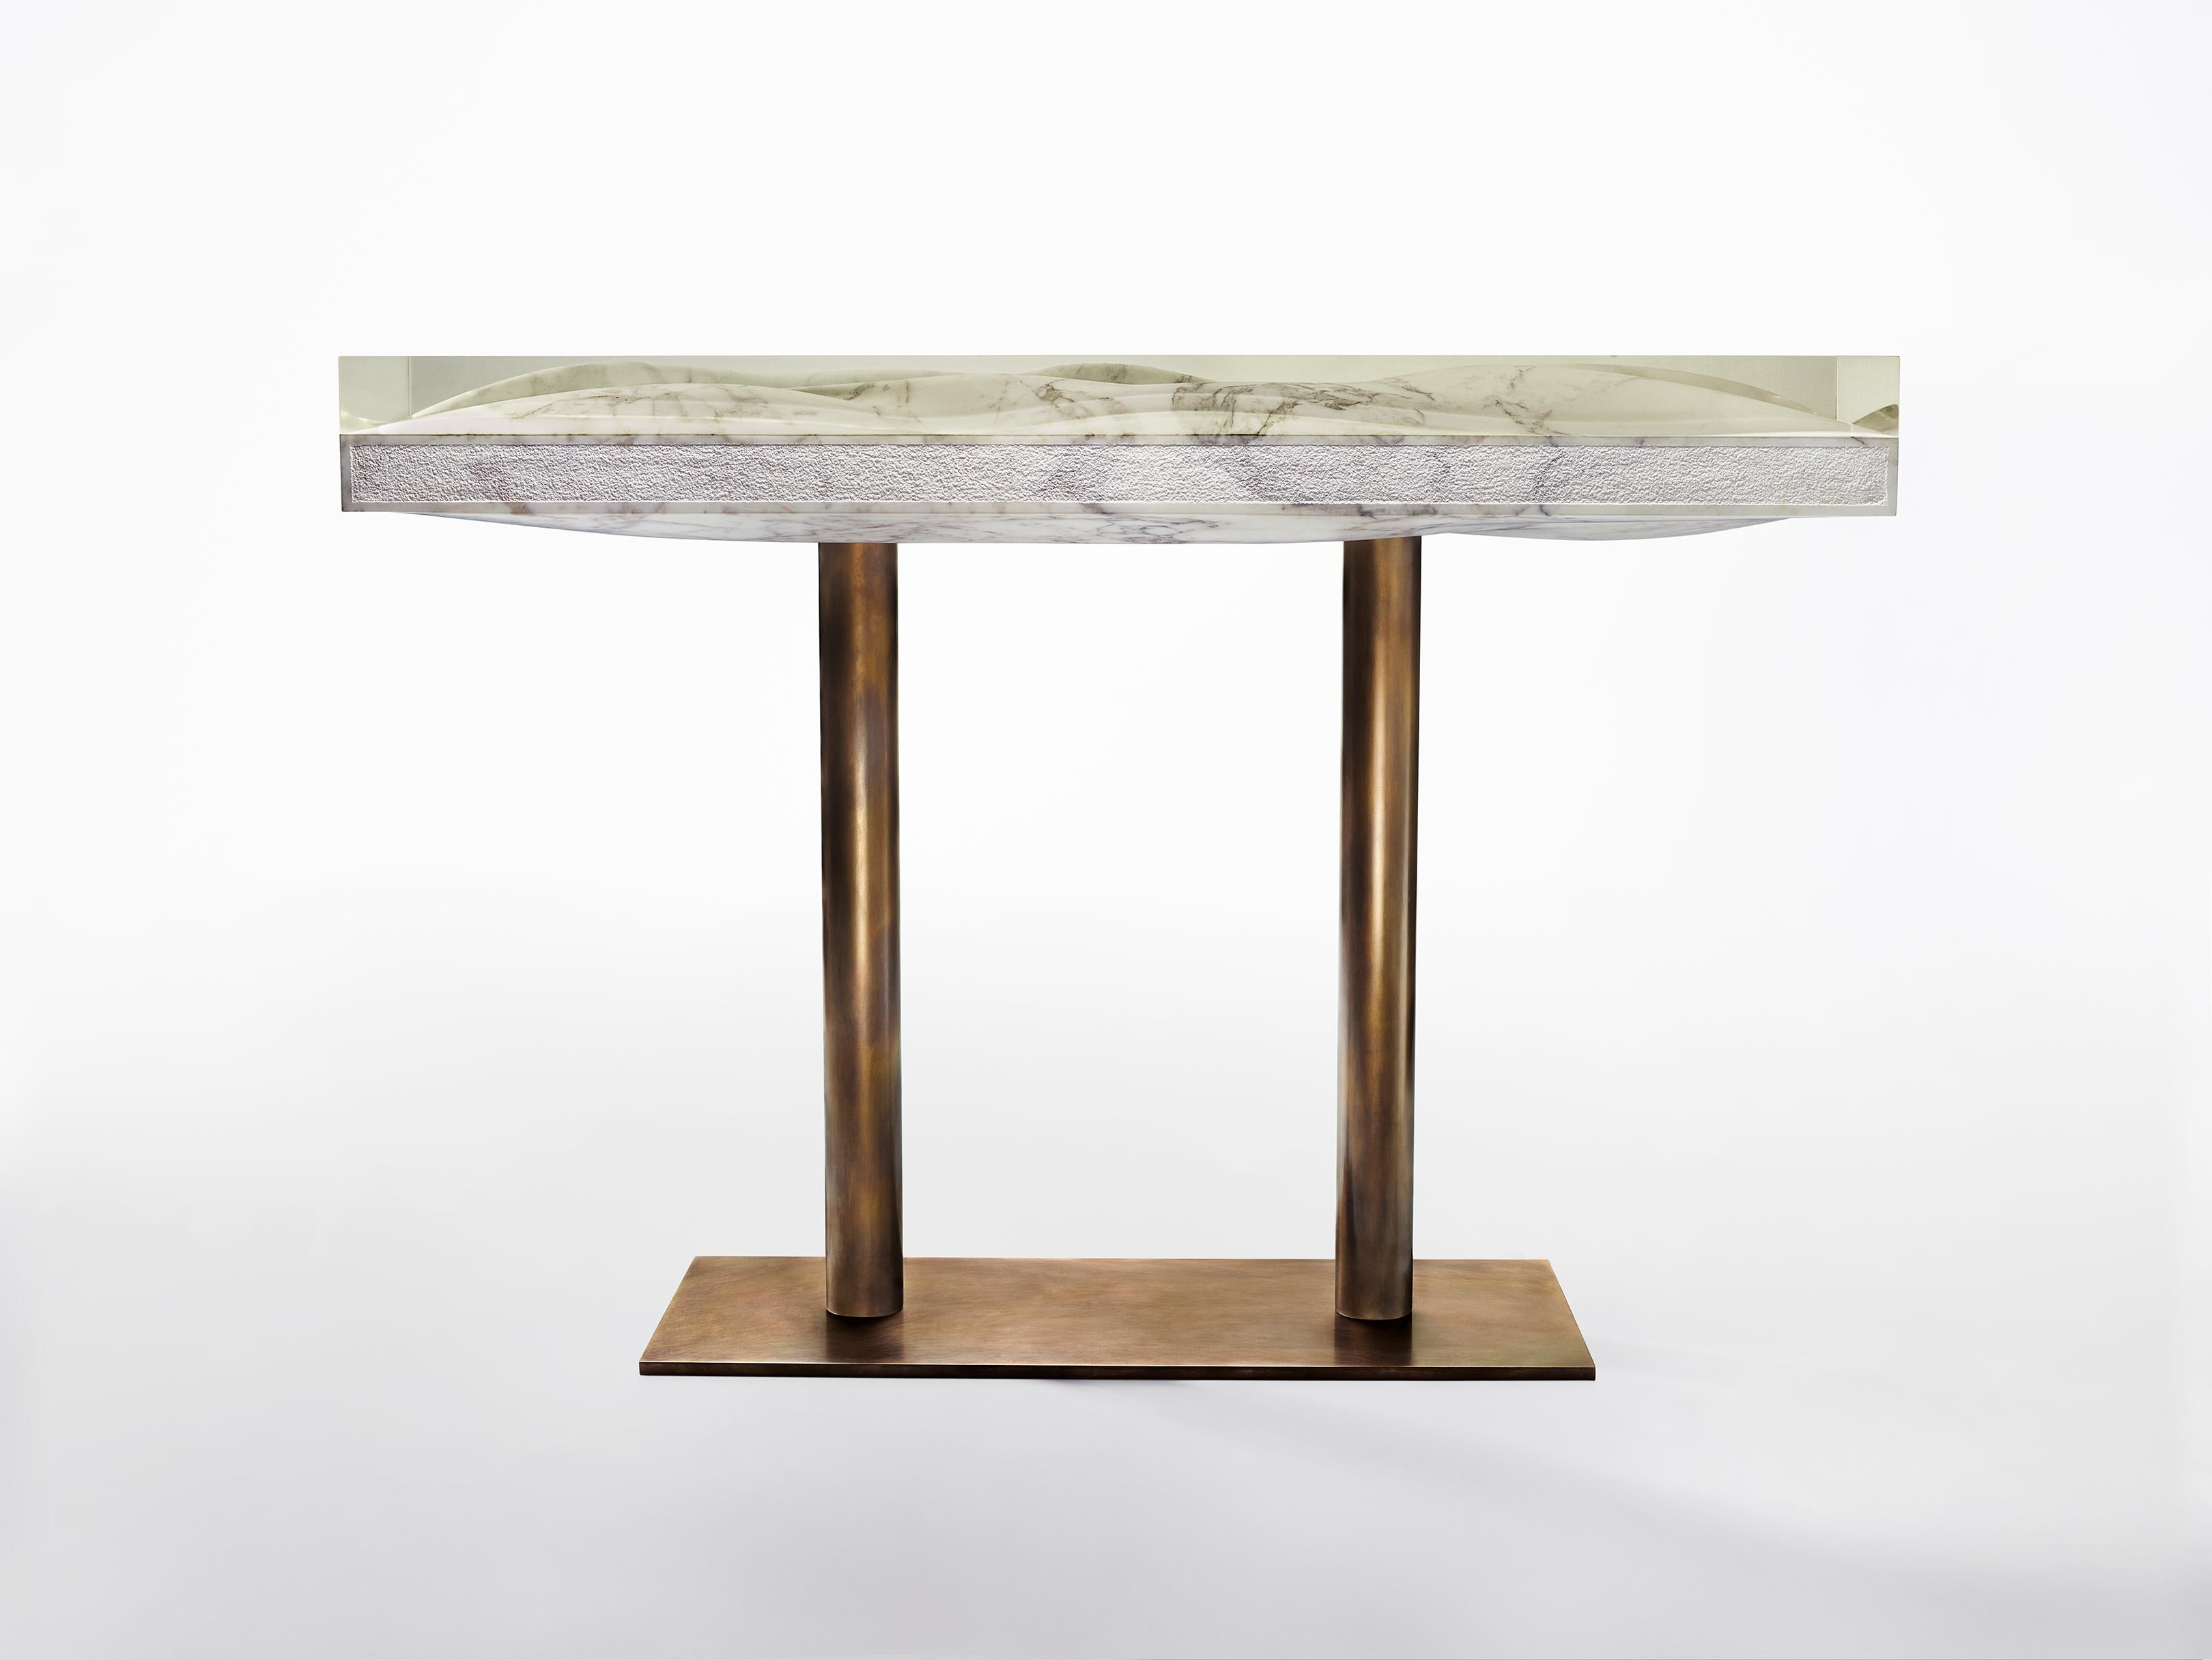 Marble console by Jonathan Hansen
9 Editions + 1 AP
Dimensions: 127 x 40.6 x 86.4 cm
Materials: Calacatta marble, architectural bronze, resin


SERIES I CAPTUM BIOMORFE is a group of nine sculpture works created by New York artist Jonathan